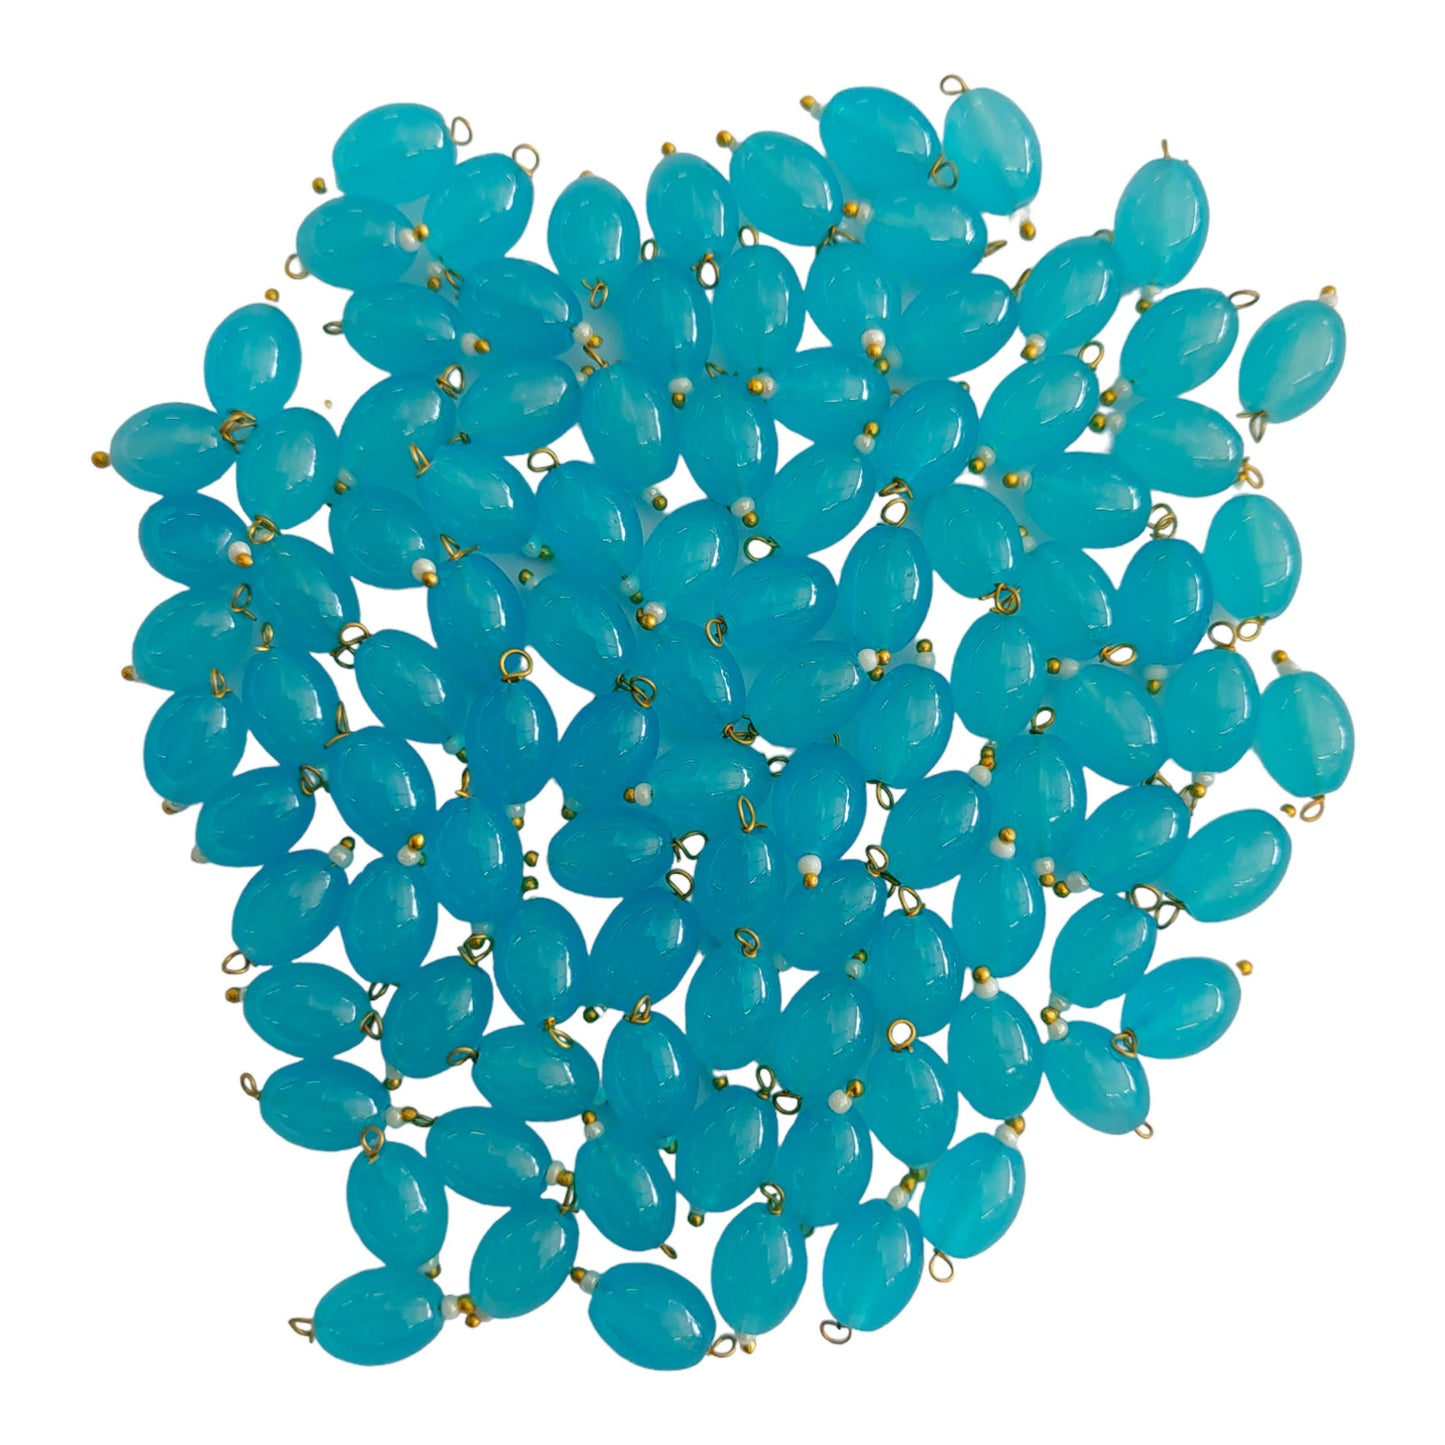 Indian Petals Colored Glass Oval Shaped with Drop Beads Ideal for Jewelry designing, Gift, Arts and Craft Making, 8x11mm